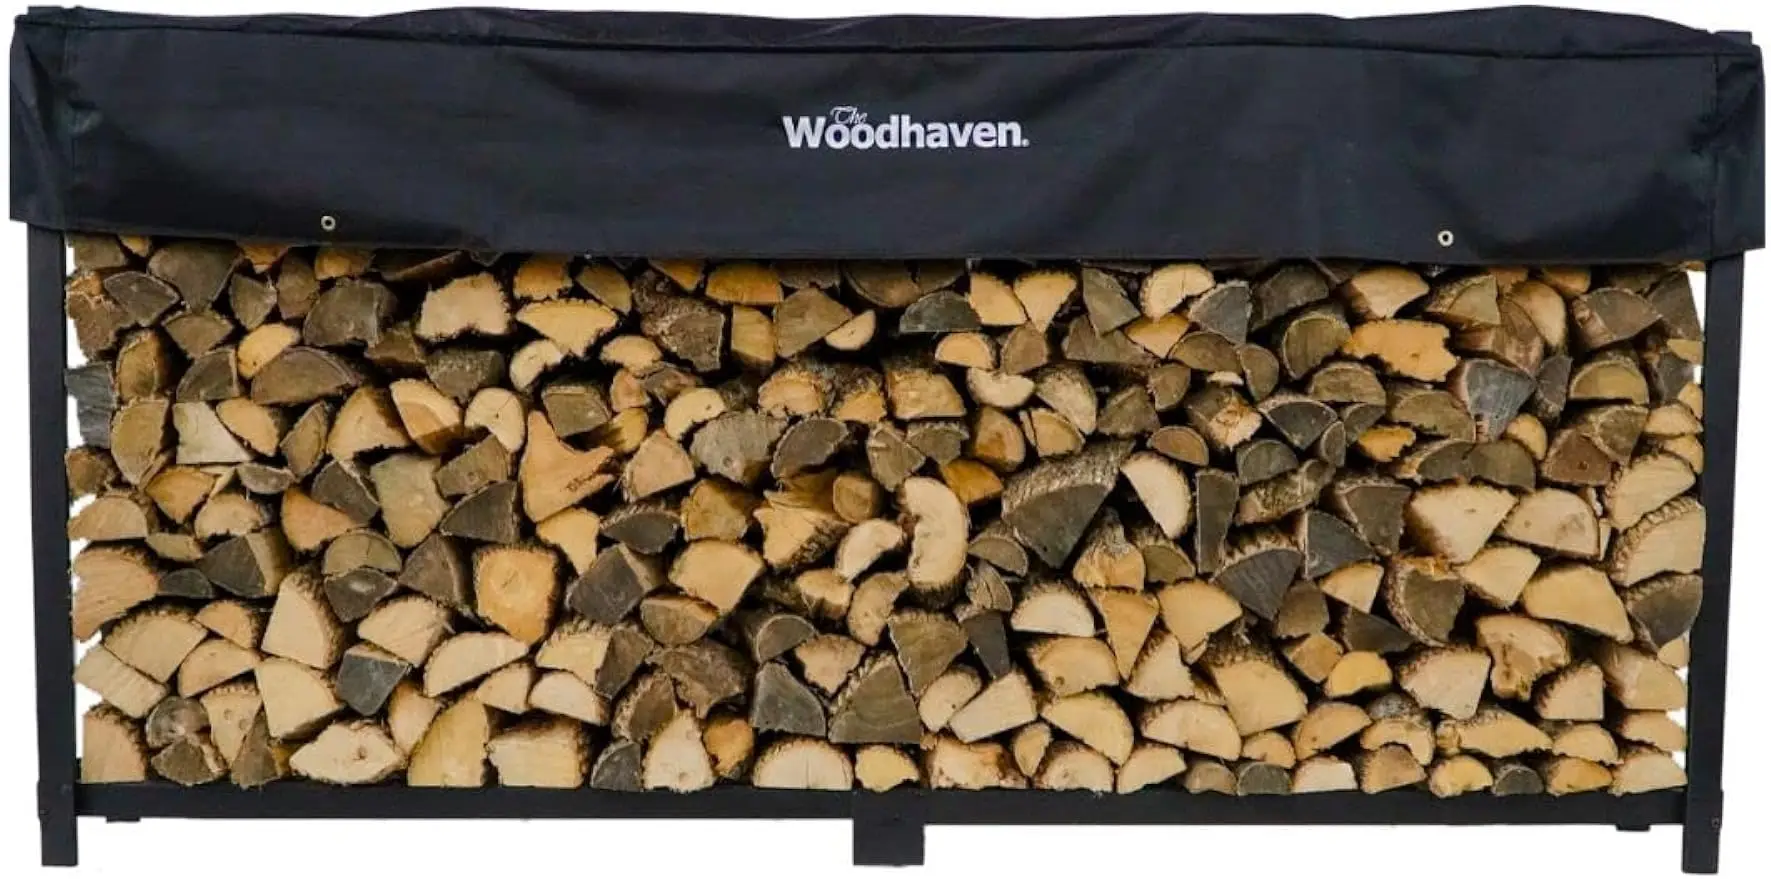 

Woodhaven 8 Foot 1/2 Cord Firewood Log Rack With Optional Cover - Made In USA - Outdoor Use Lifetime Structural